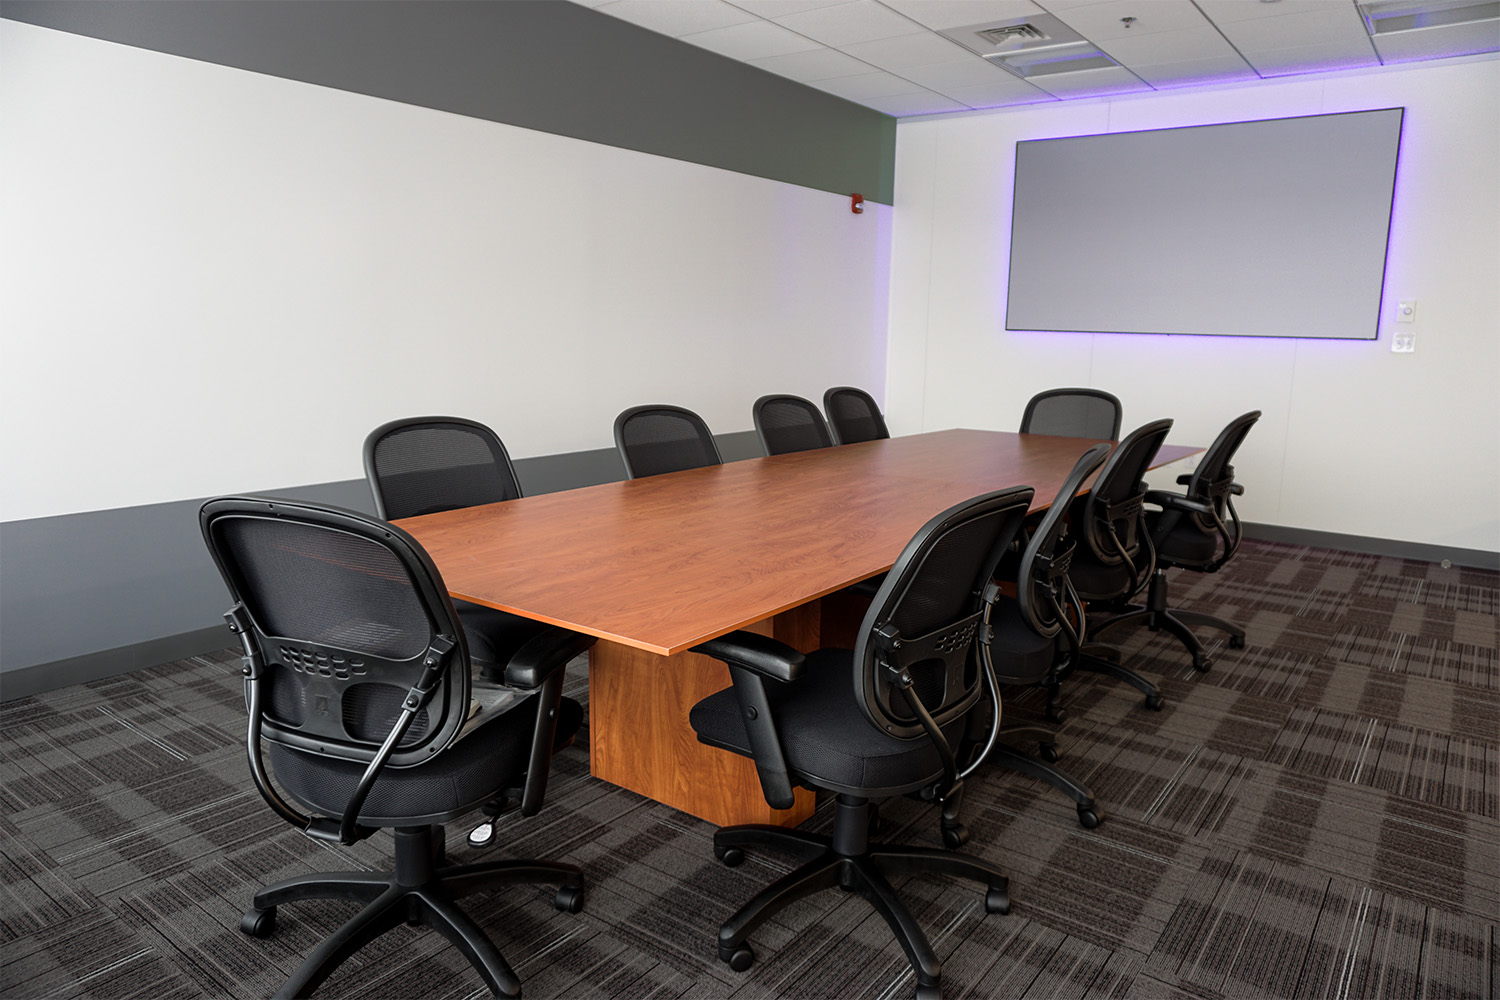 Large conference room with multiple chairs and long tables